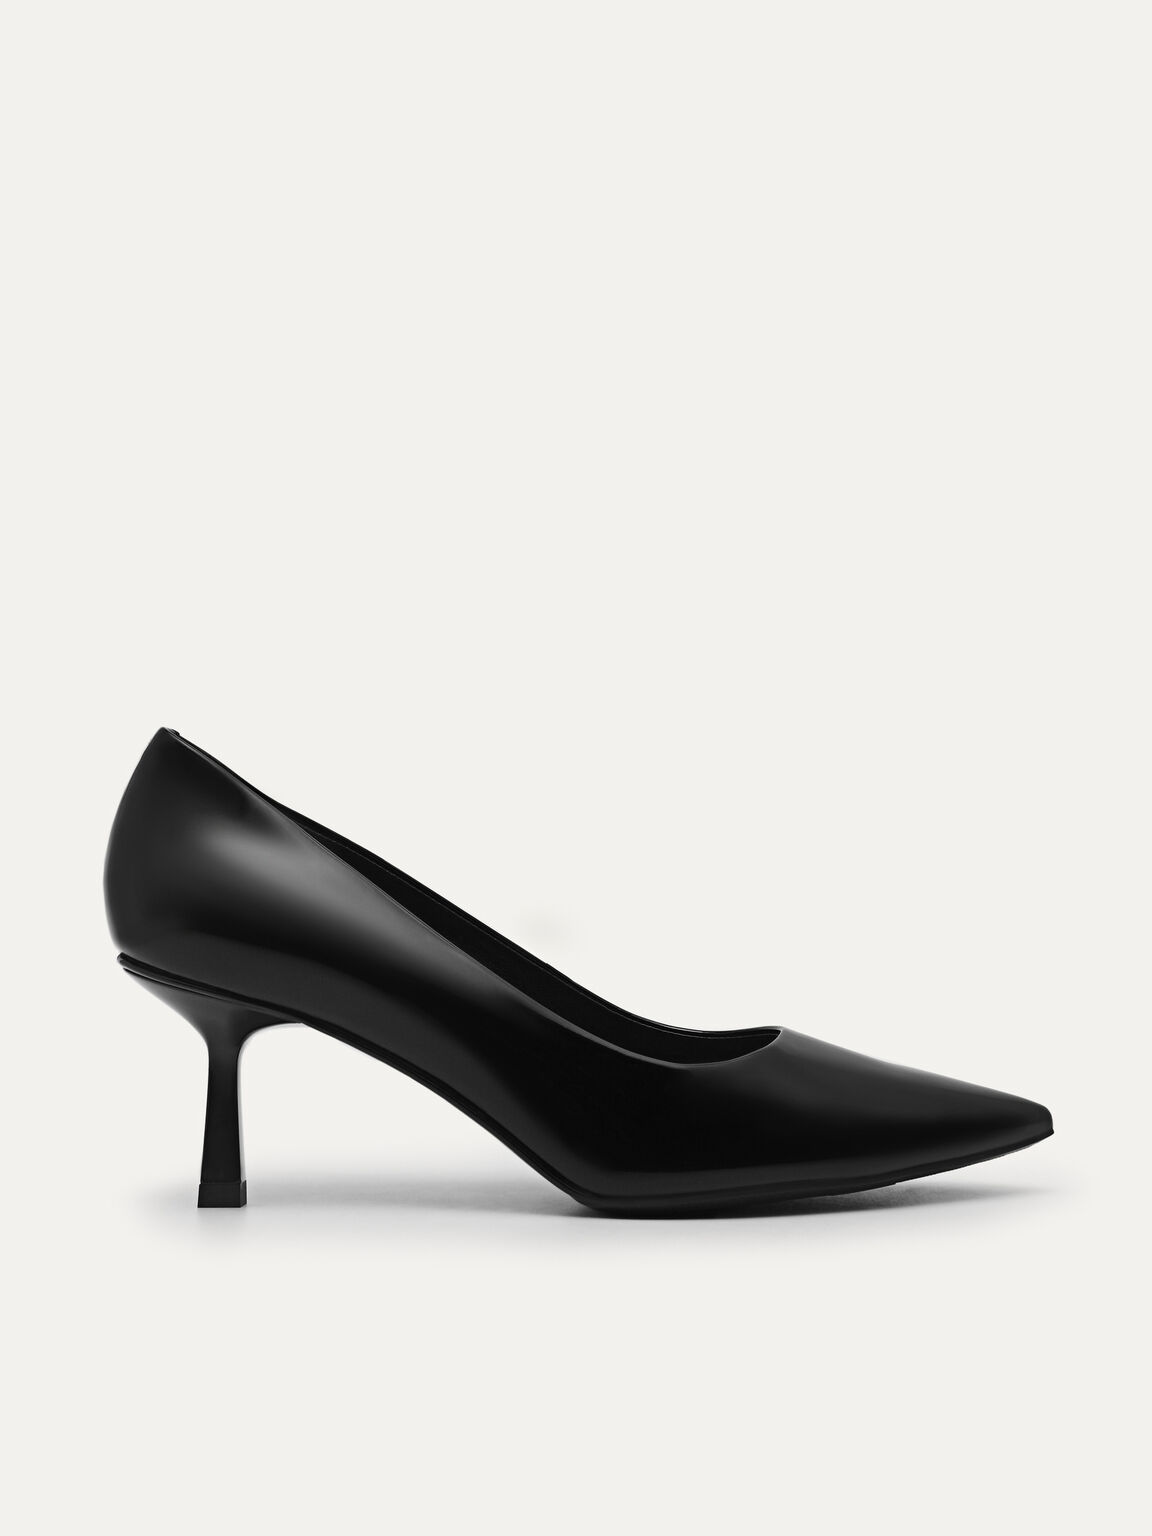 Patent Leather Pointed Pumps, Black